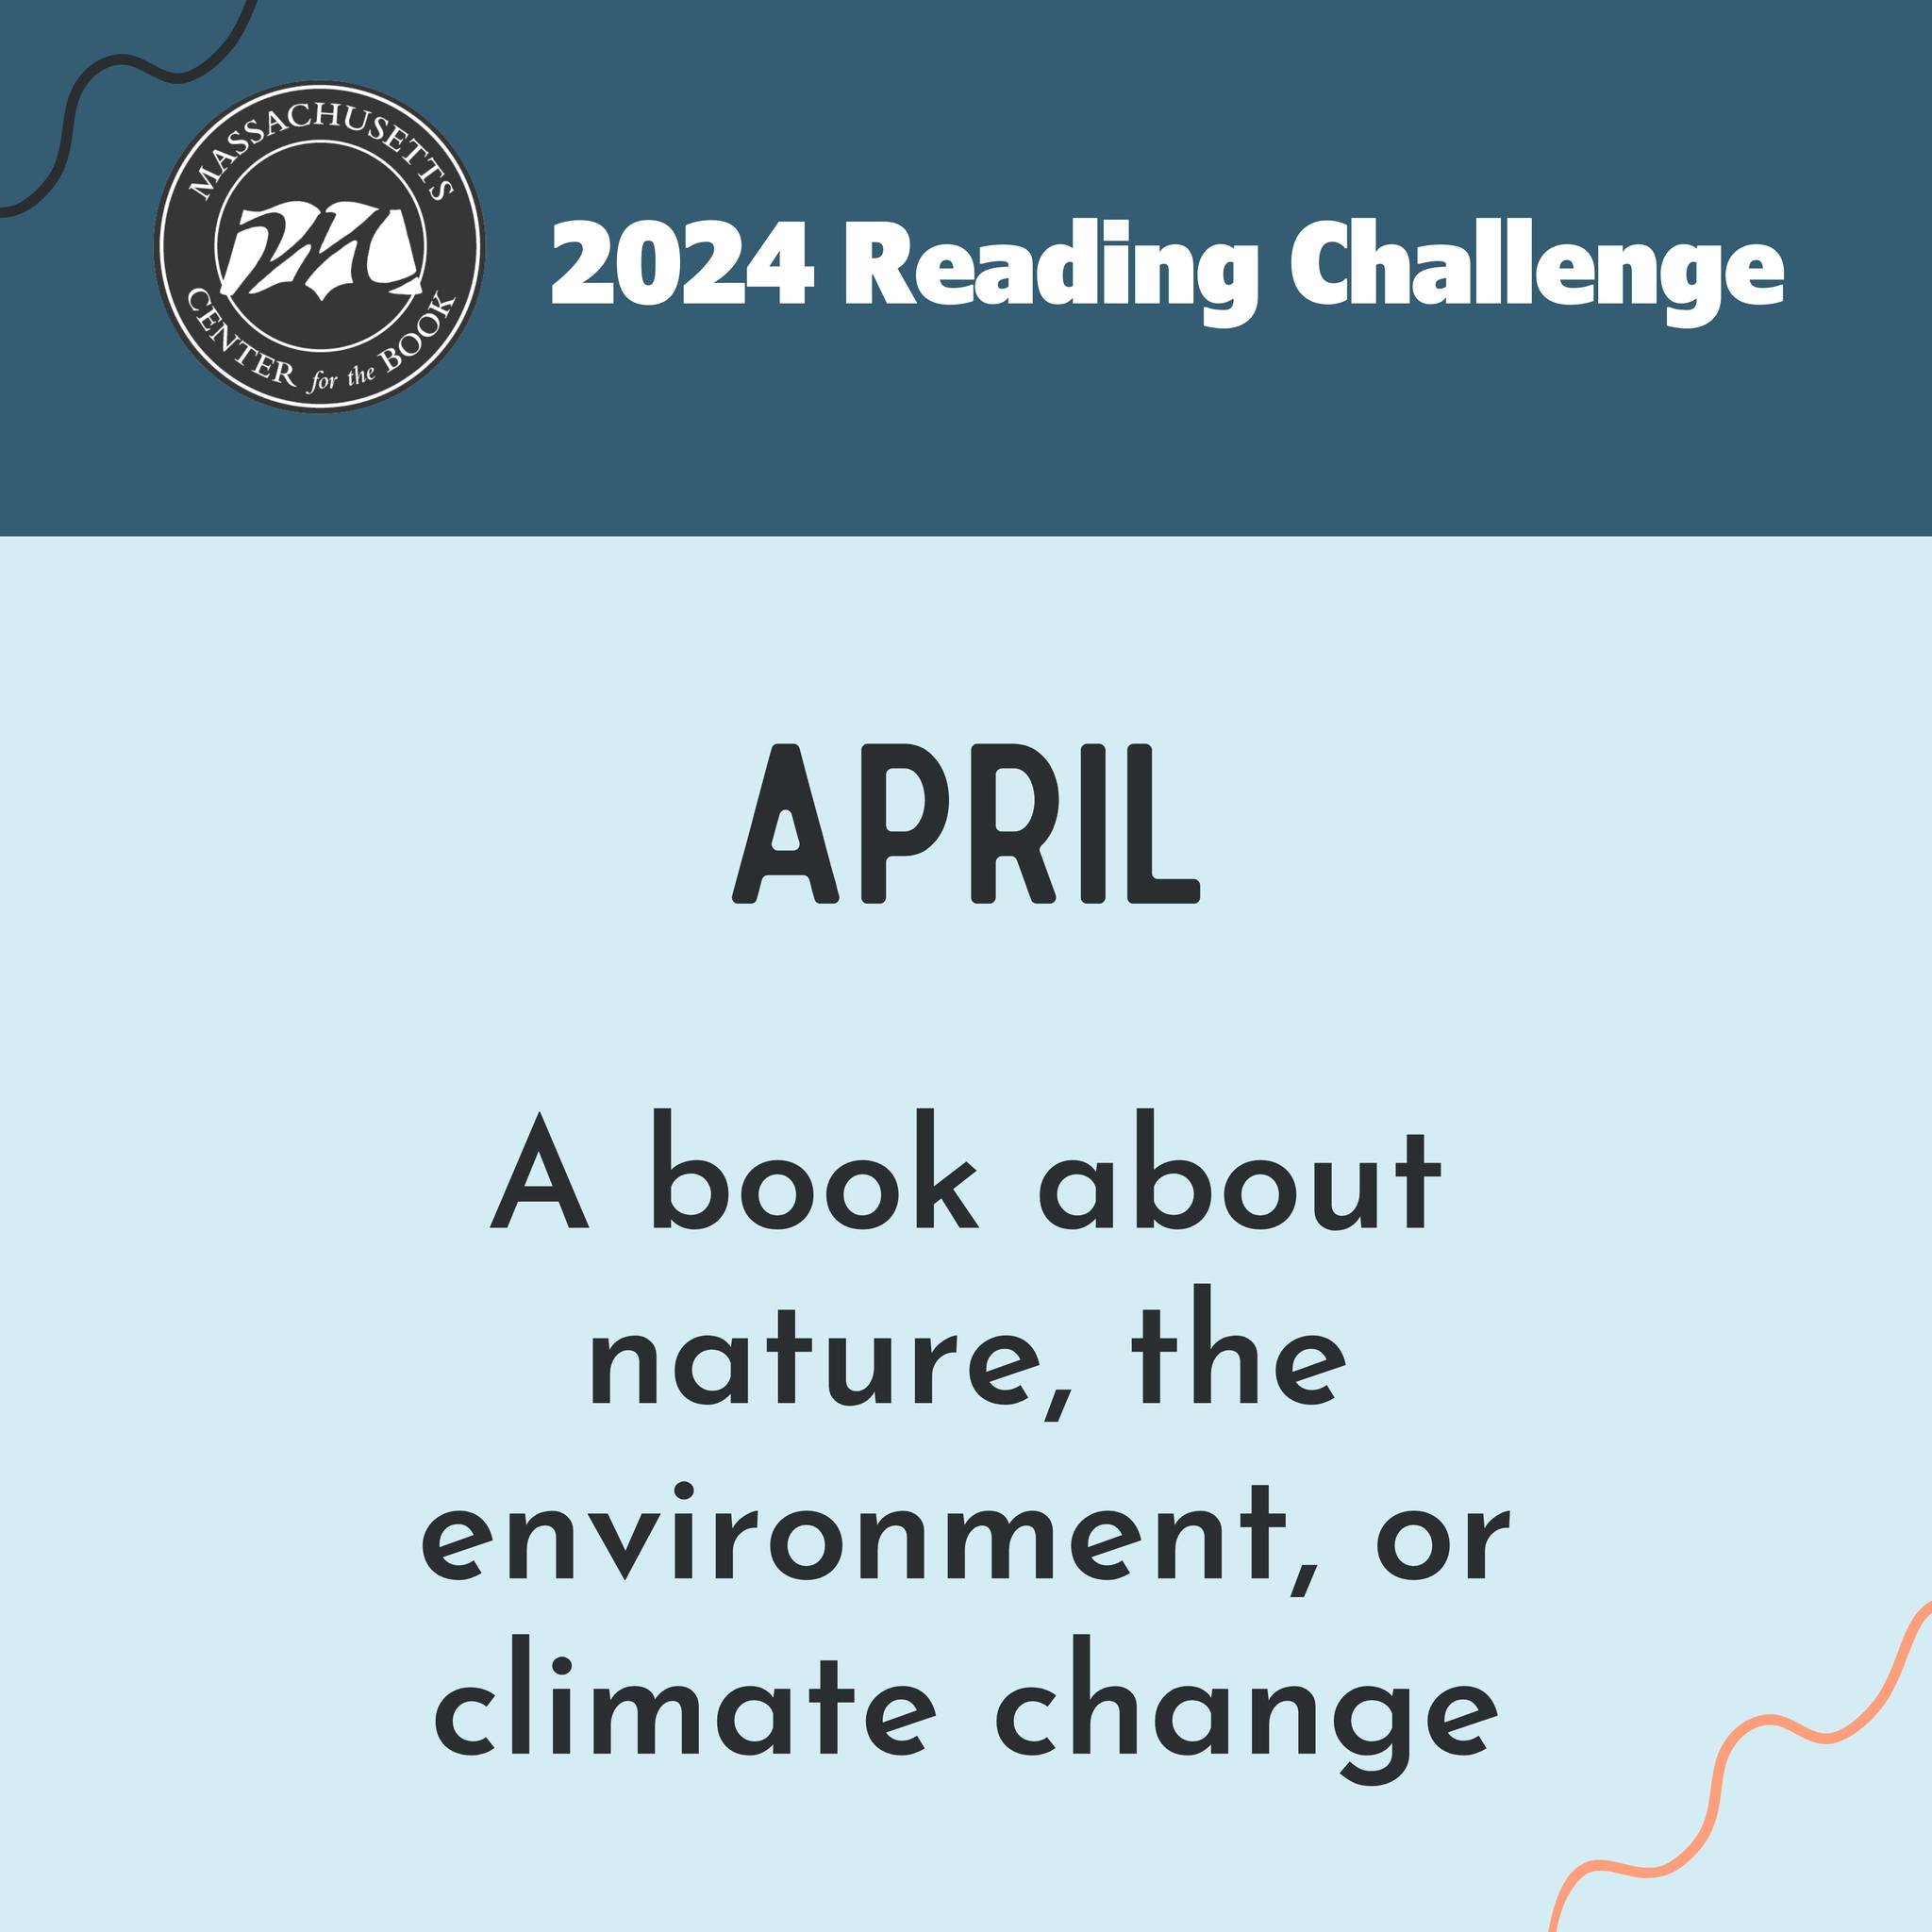 Reminder to join the #MassBookReadingChallenge! April's challenge: A book about nature, the environment, or climate change
Need ideas for what to read? Check out our NPL Earth Day book display at the library.

 #earthday #bookstagram #bookclub #Cente